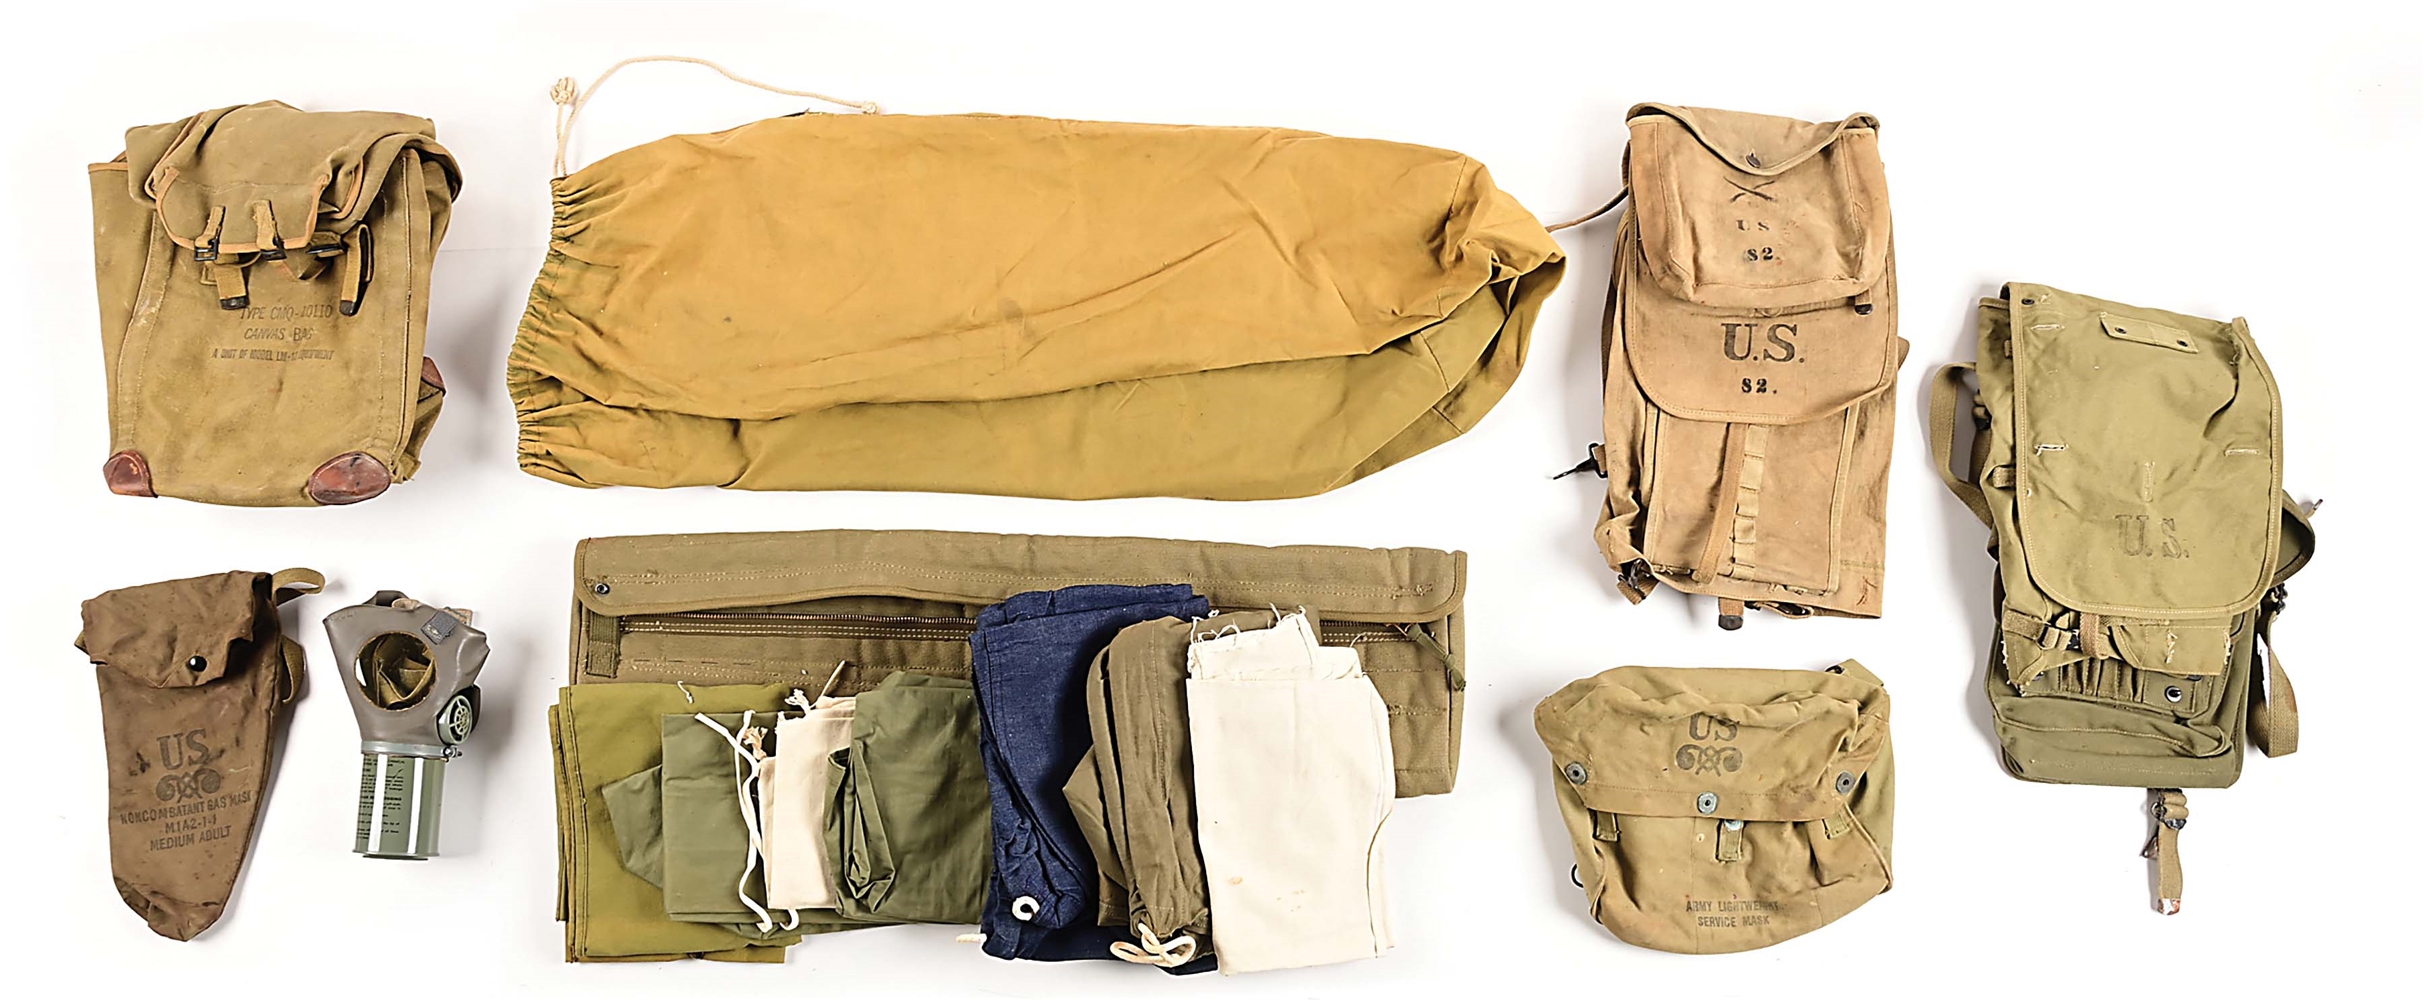 LARGE LOT OF US WWI-WWII HAVERSACKS, DITTY BAGS, AND EQUIPMENT BAGS.